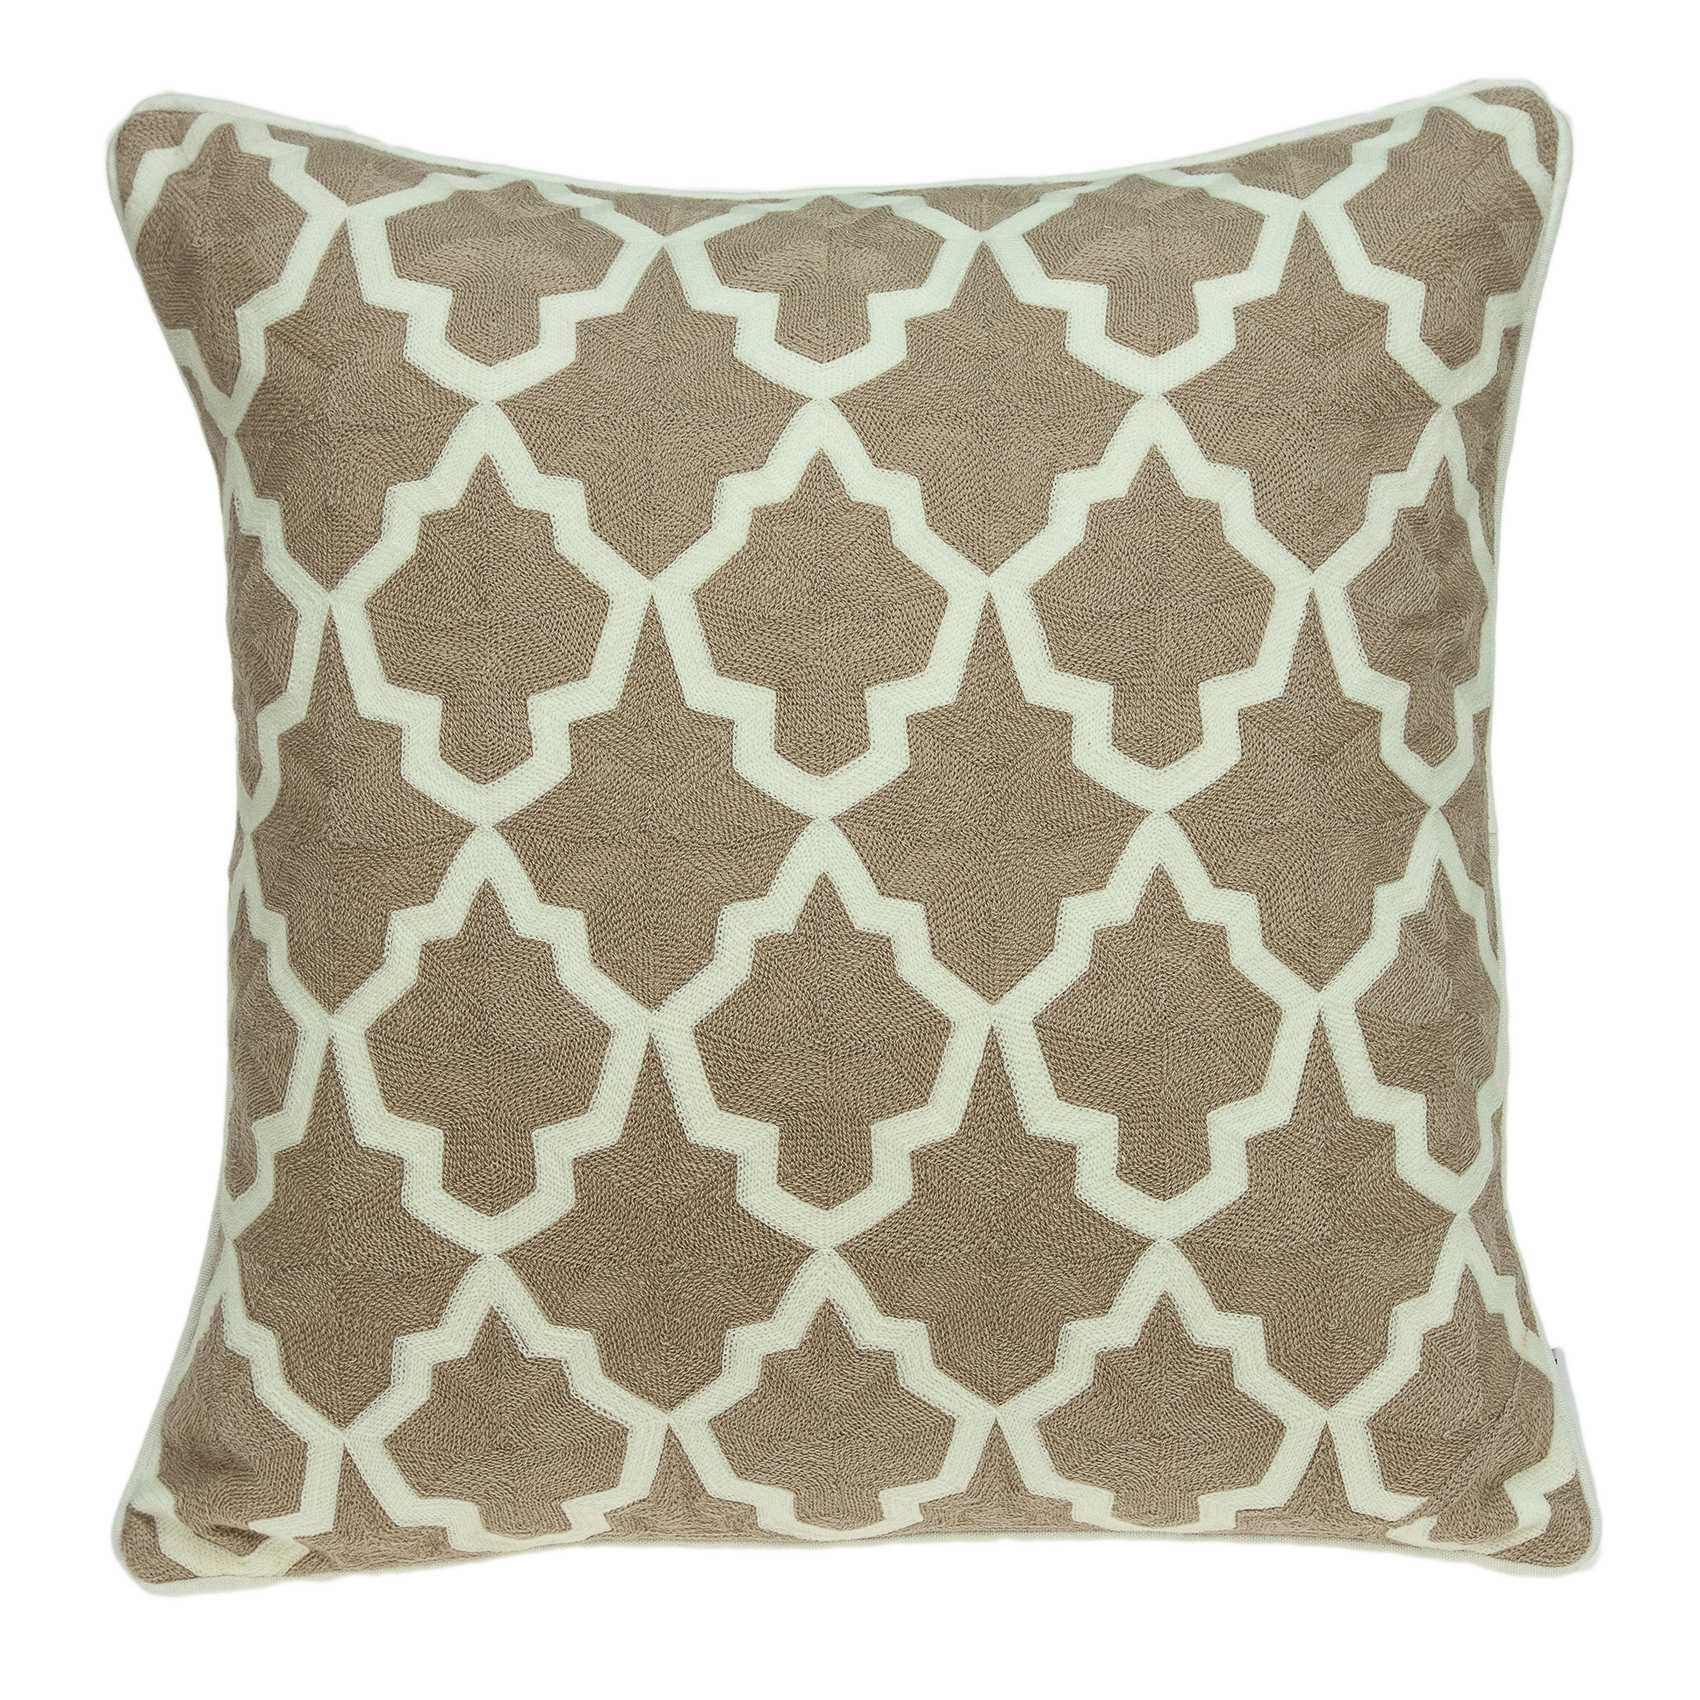 20" x 0.5" x 20" Transitional Beige and White Pillow Cover